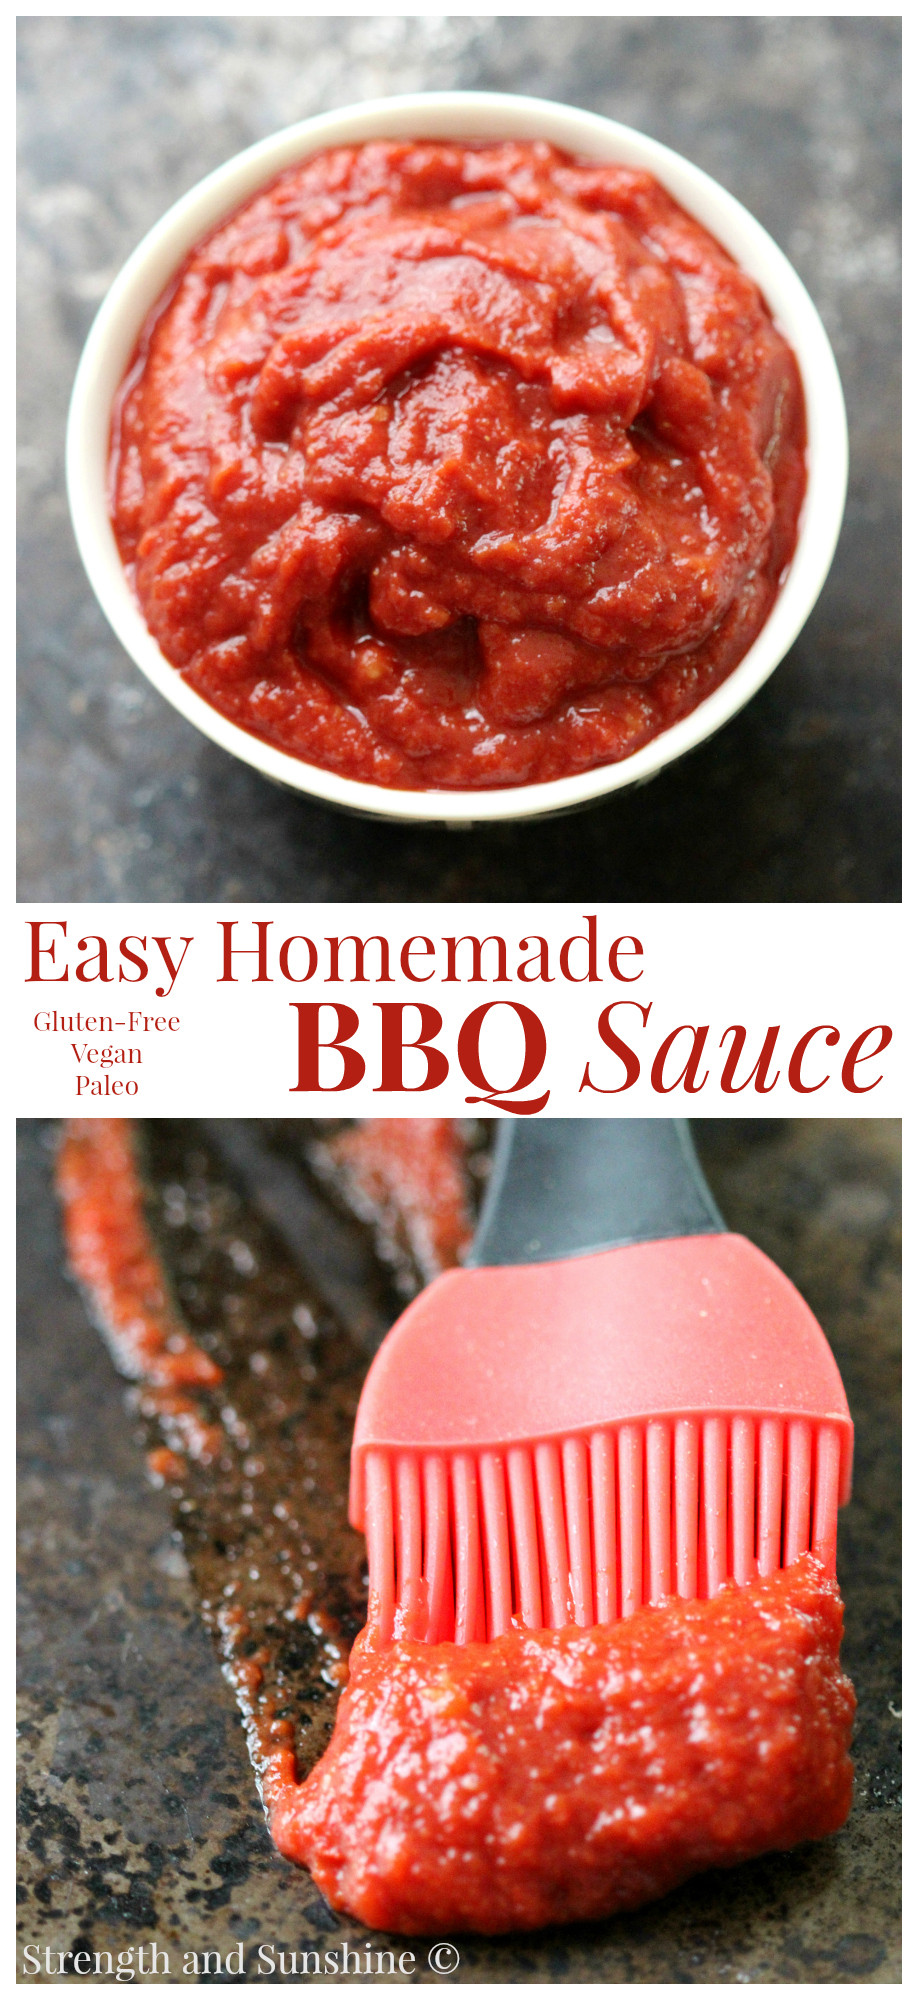 Healthy Bbq Sauce Brands
 healthy barbecue sauce brands